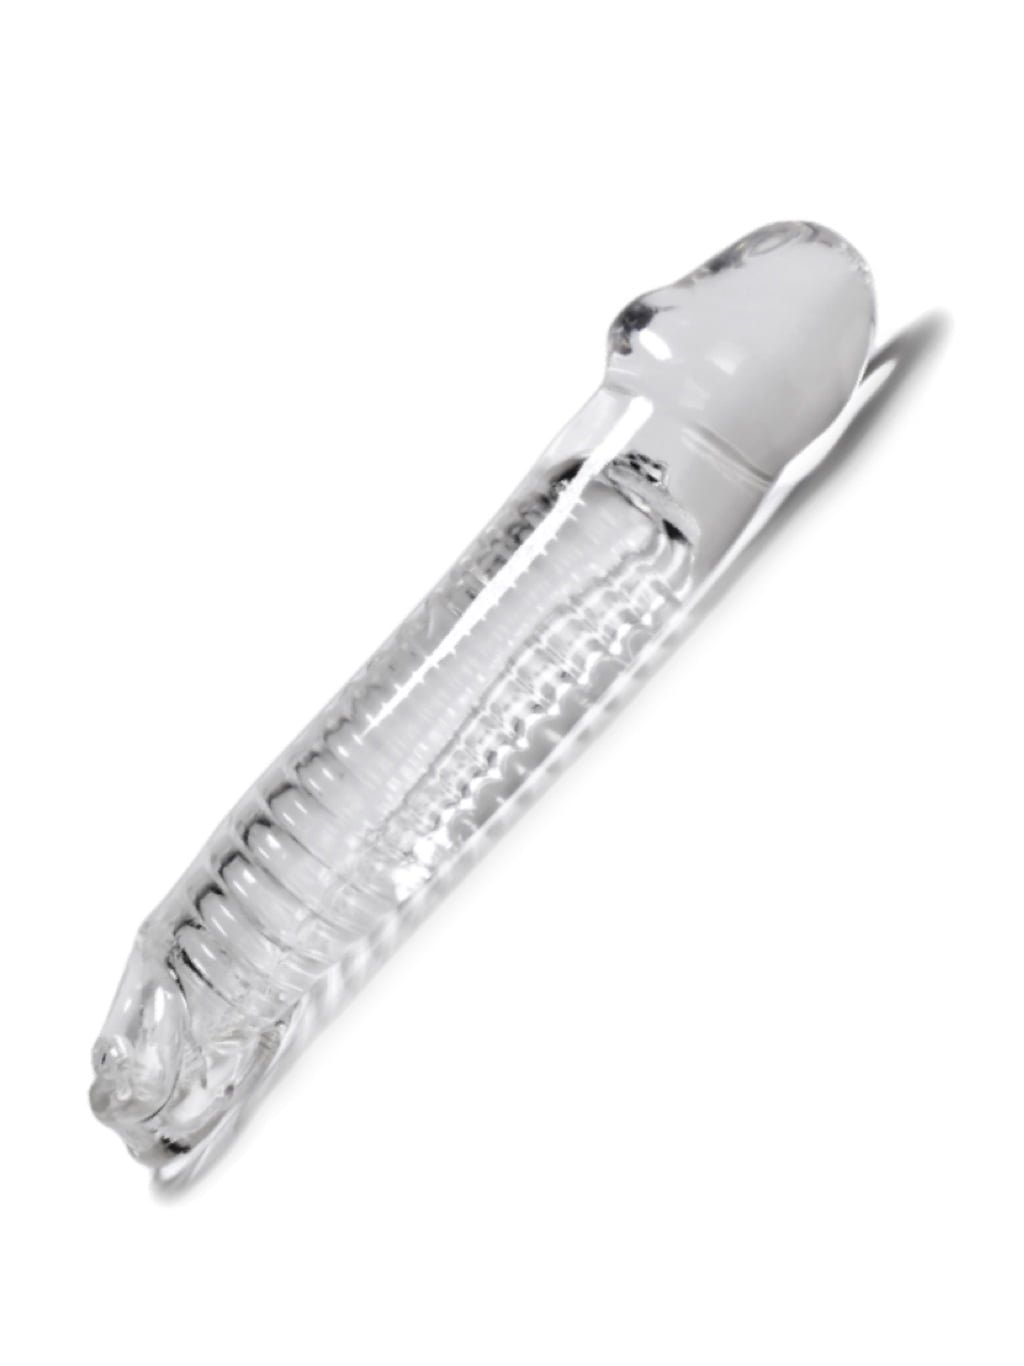 Oxballs Muscle Smooth Cocksheath Length Insert – Clear